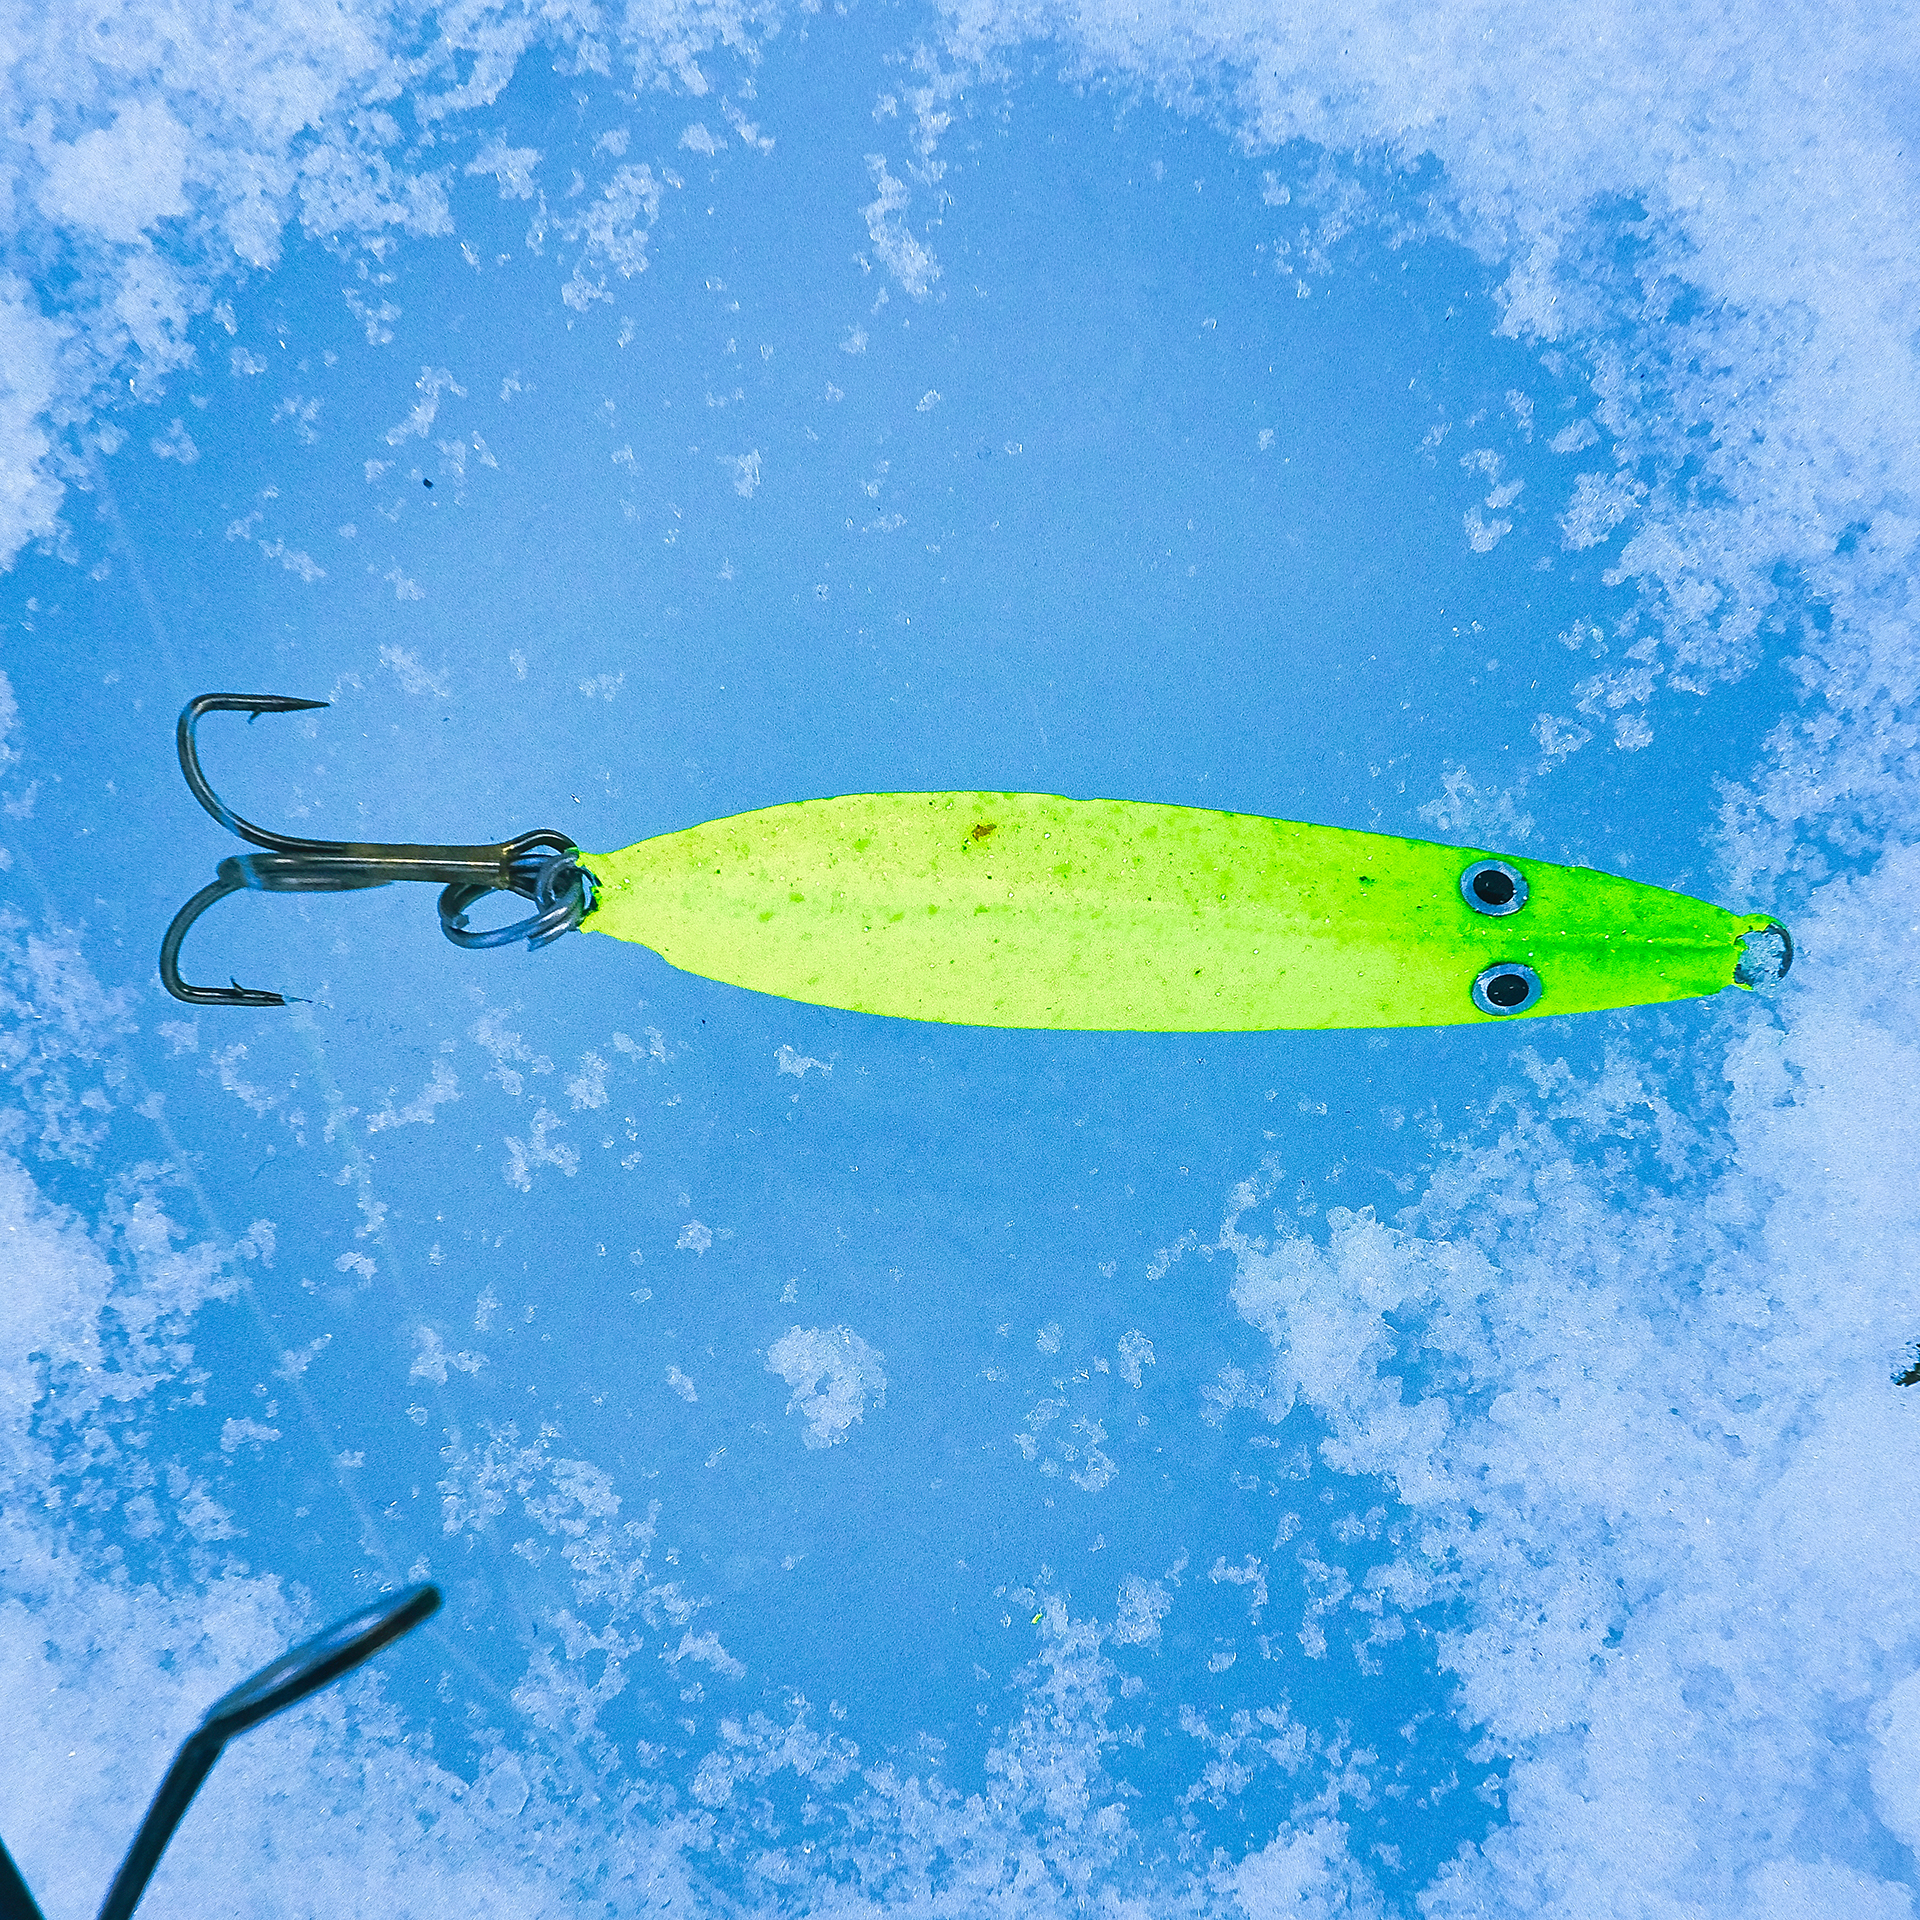 D&D Lures Jigging Spoon – 1 oz - Lured Outdoors Ice Fishing Rentals